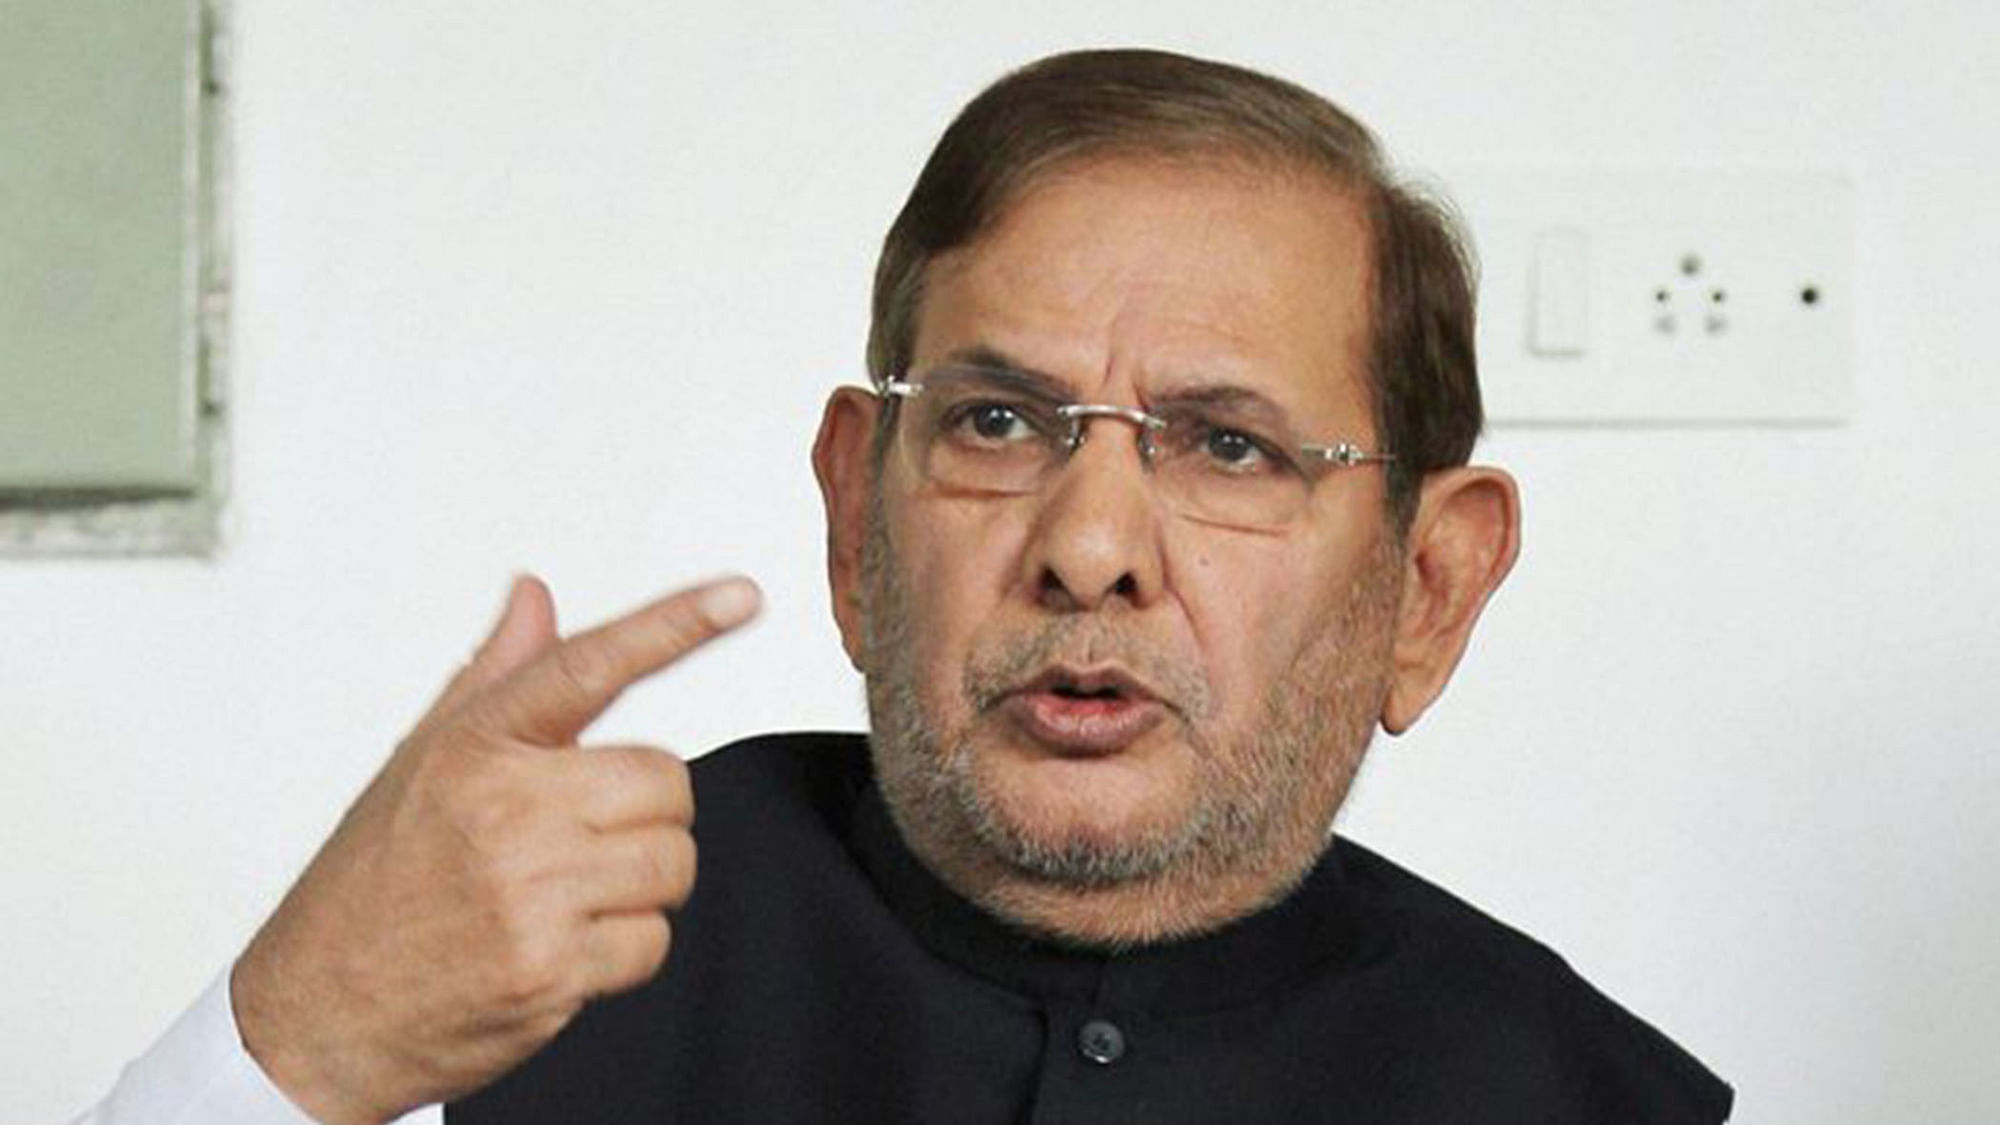 Sharad Yadav has a past record of making sexist comments. (Photo: PTI)